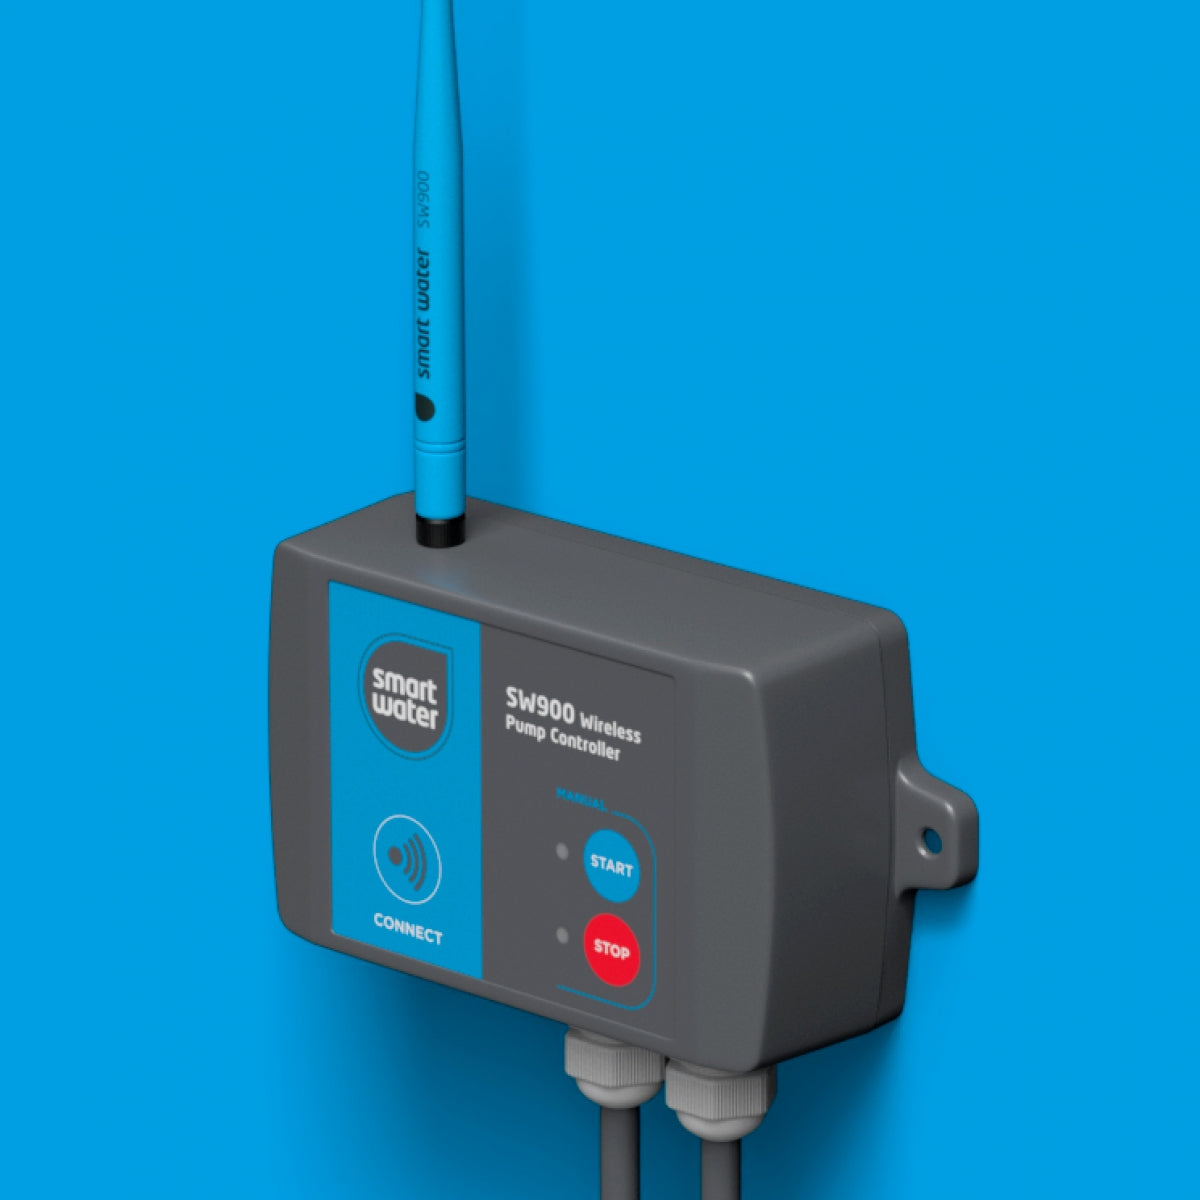 Smart Water SW900-PUMP-C/O - Wireless Pump Controller - 12VDC Change Over Version - Tech Supply Shed